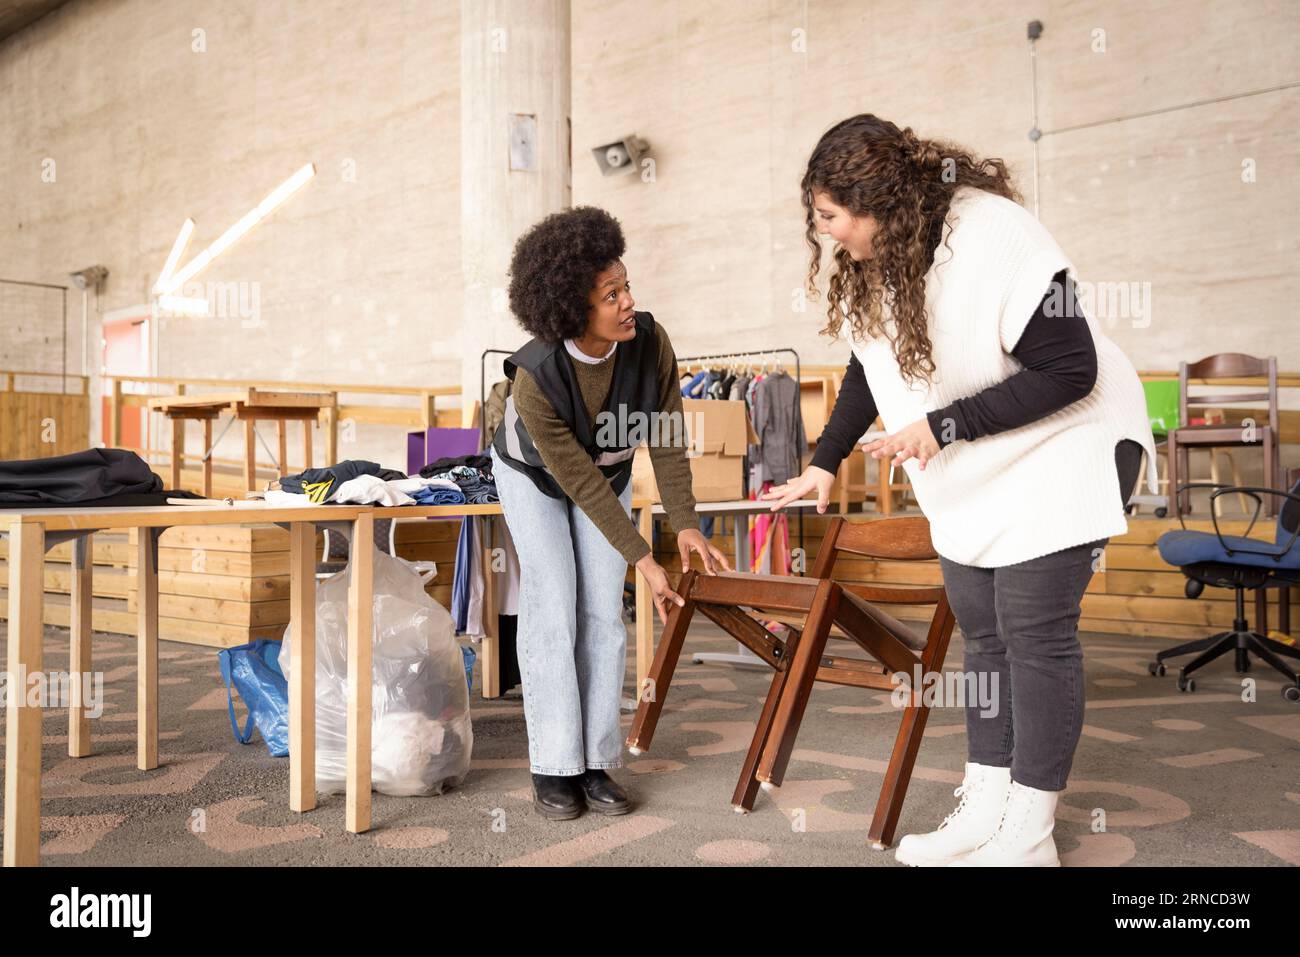 Female workers discussing over wooden chair at recycling center Stock Photo